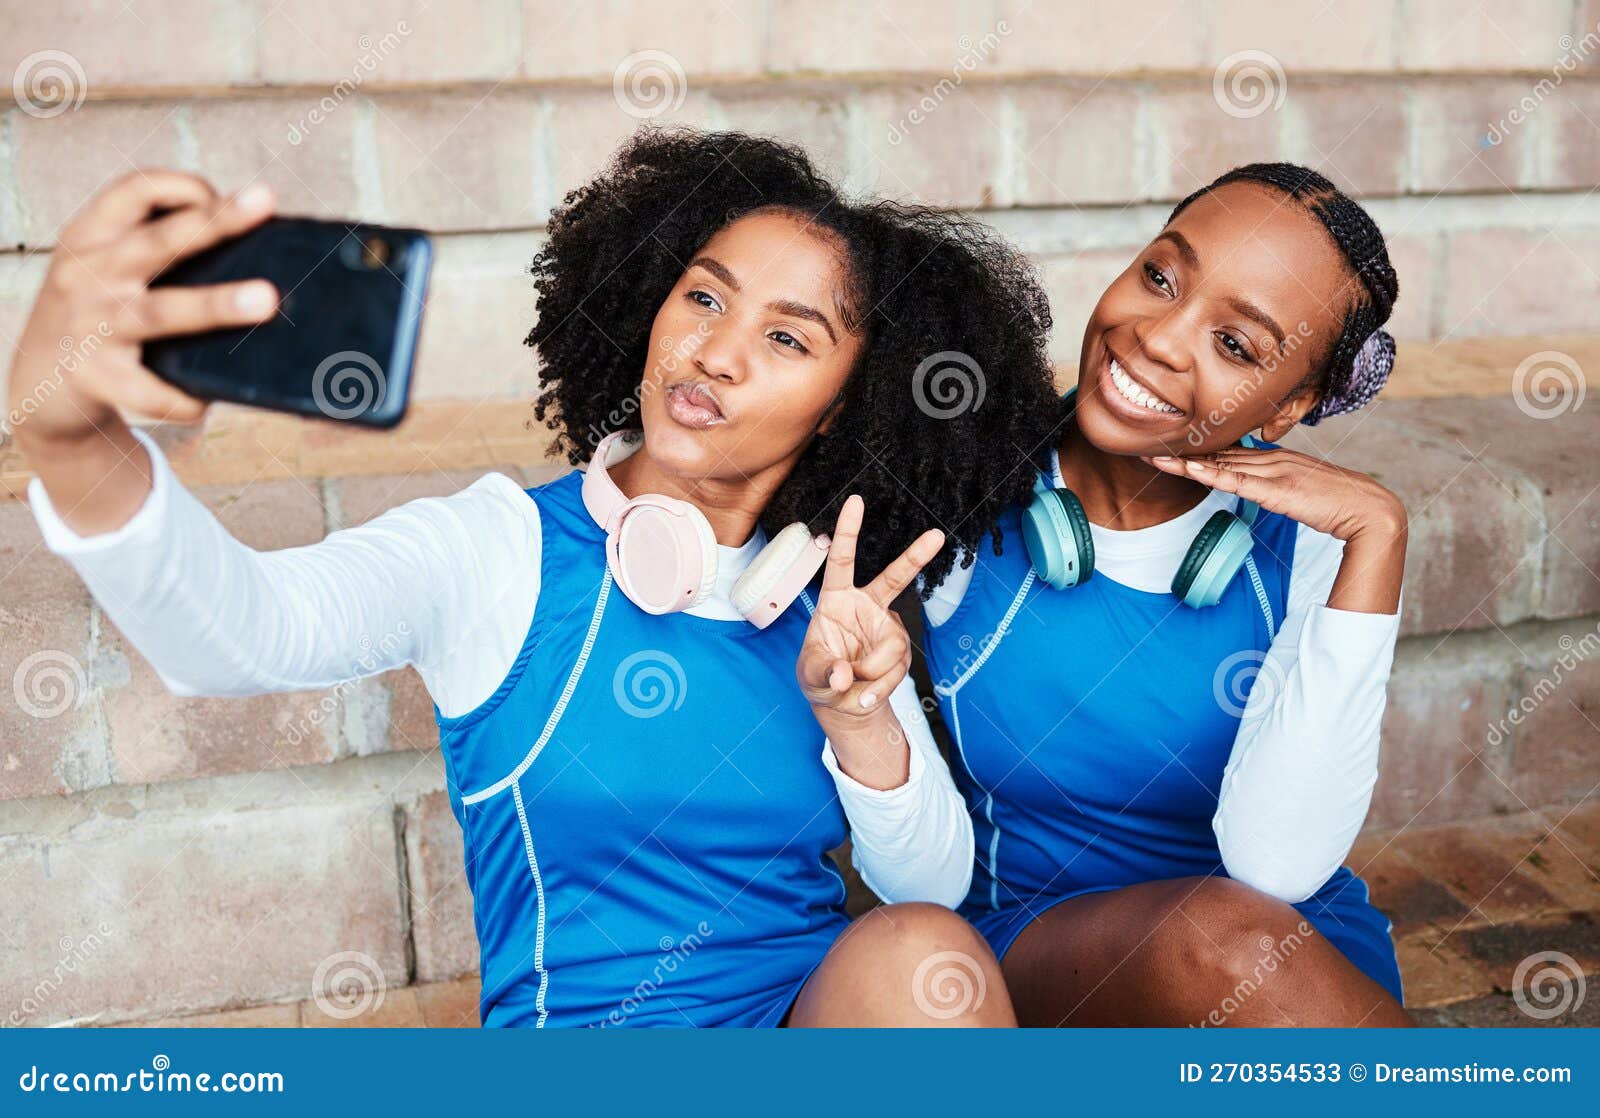 Selfie Pose Ideas For Girls APK for Android - Download